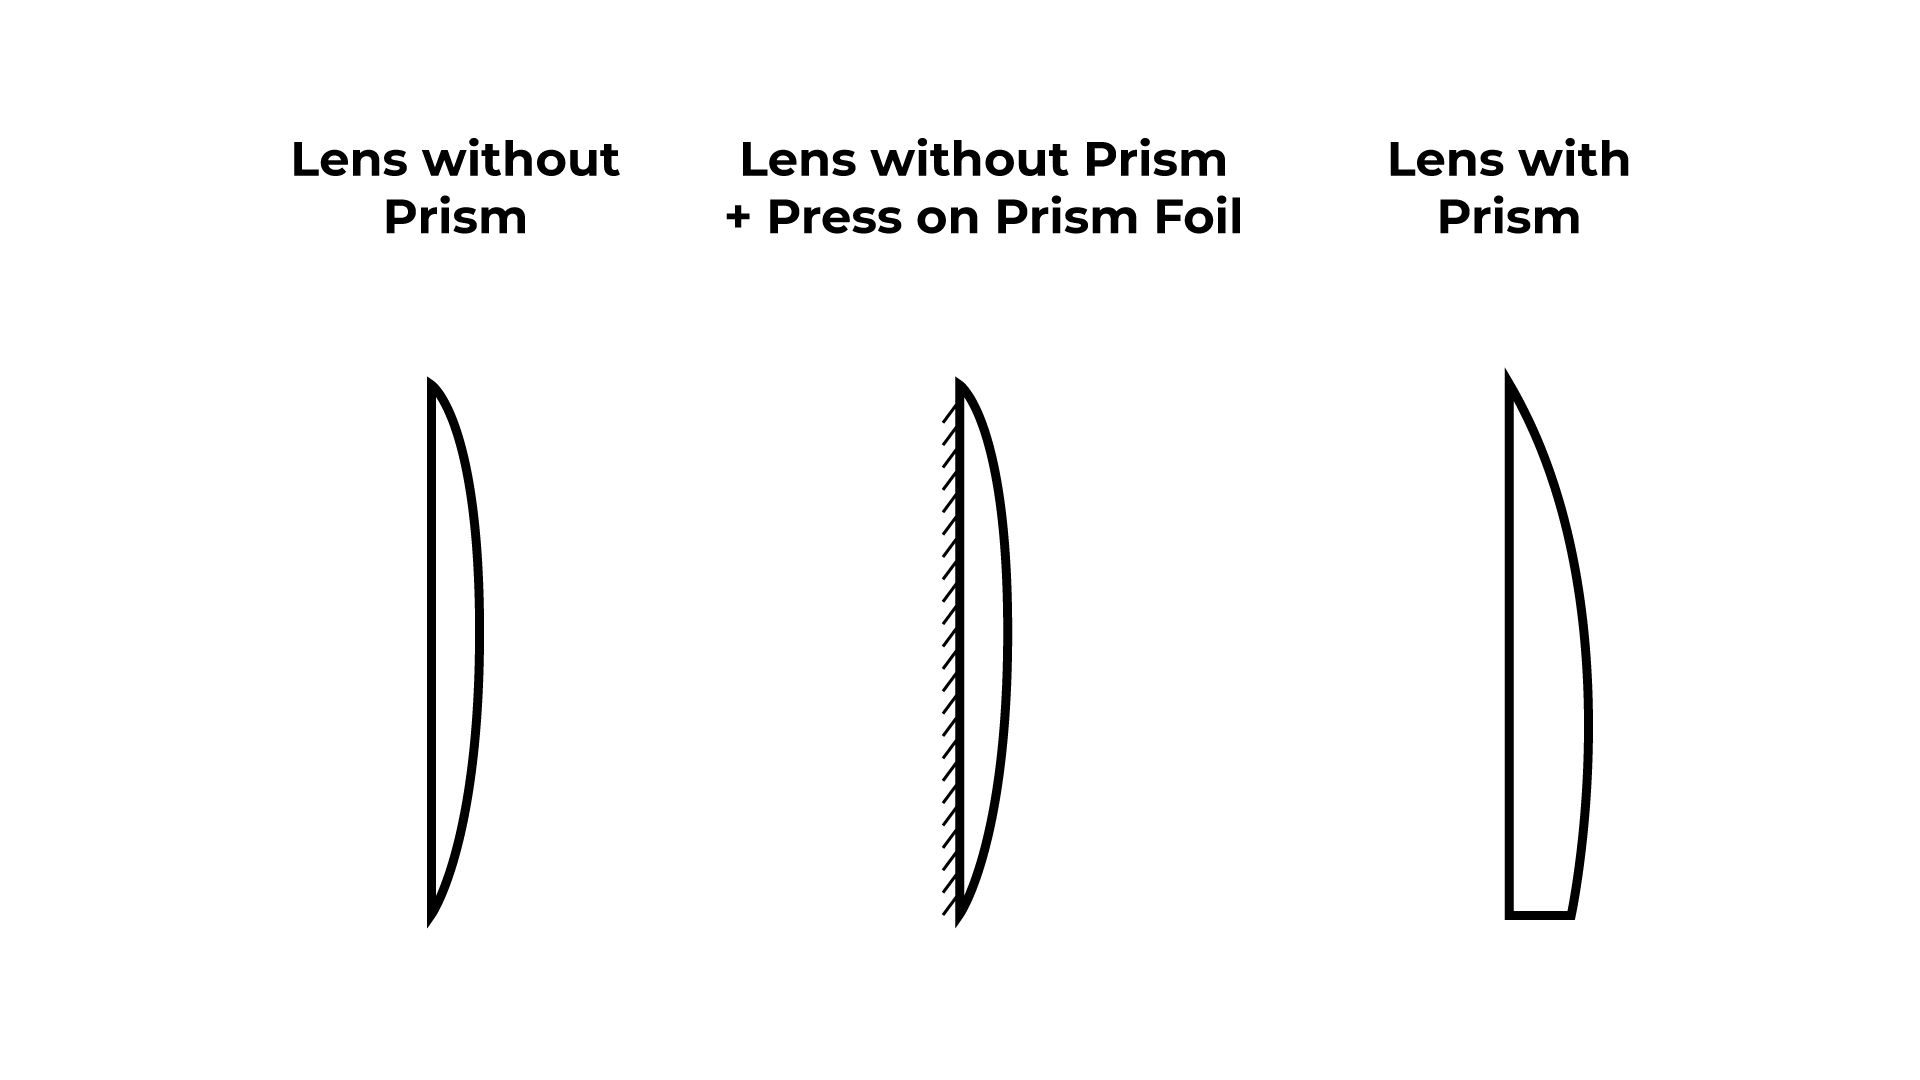 Illustration of lenses with and without prism